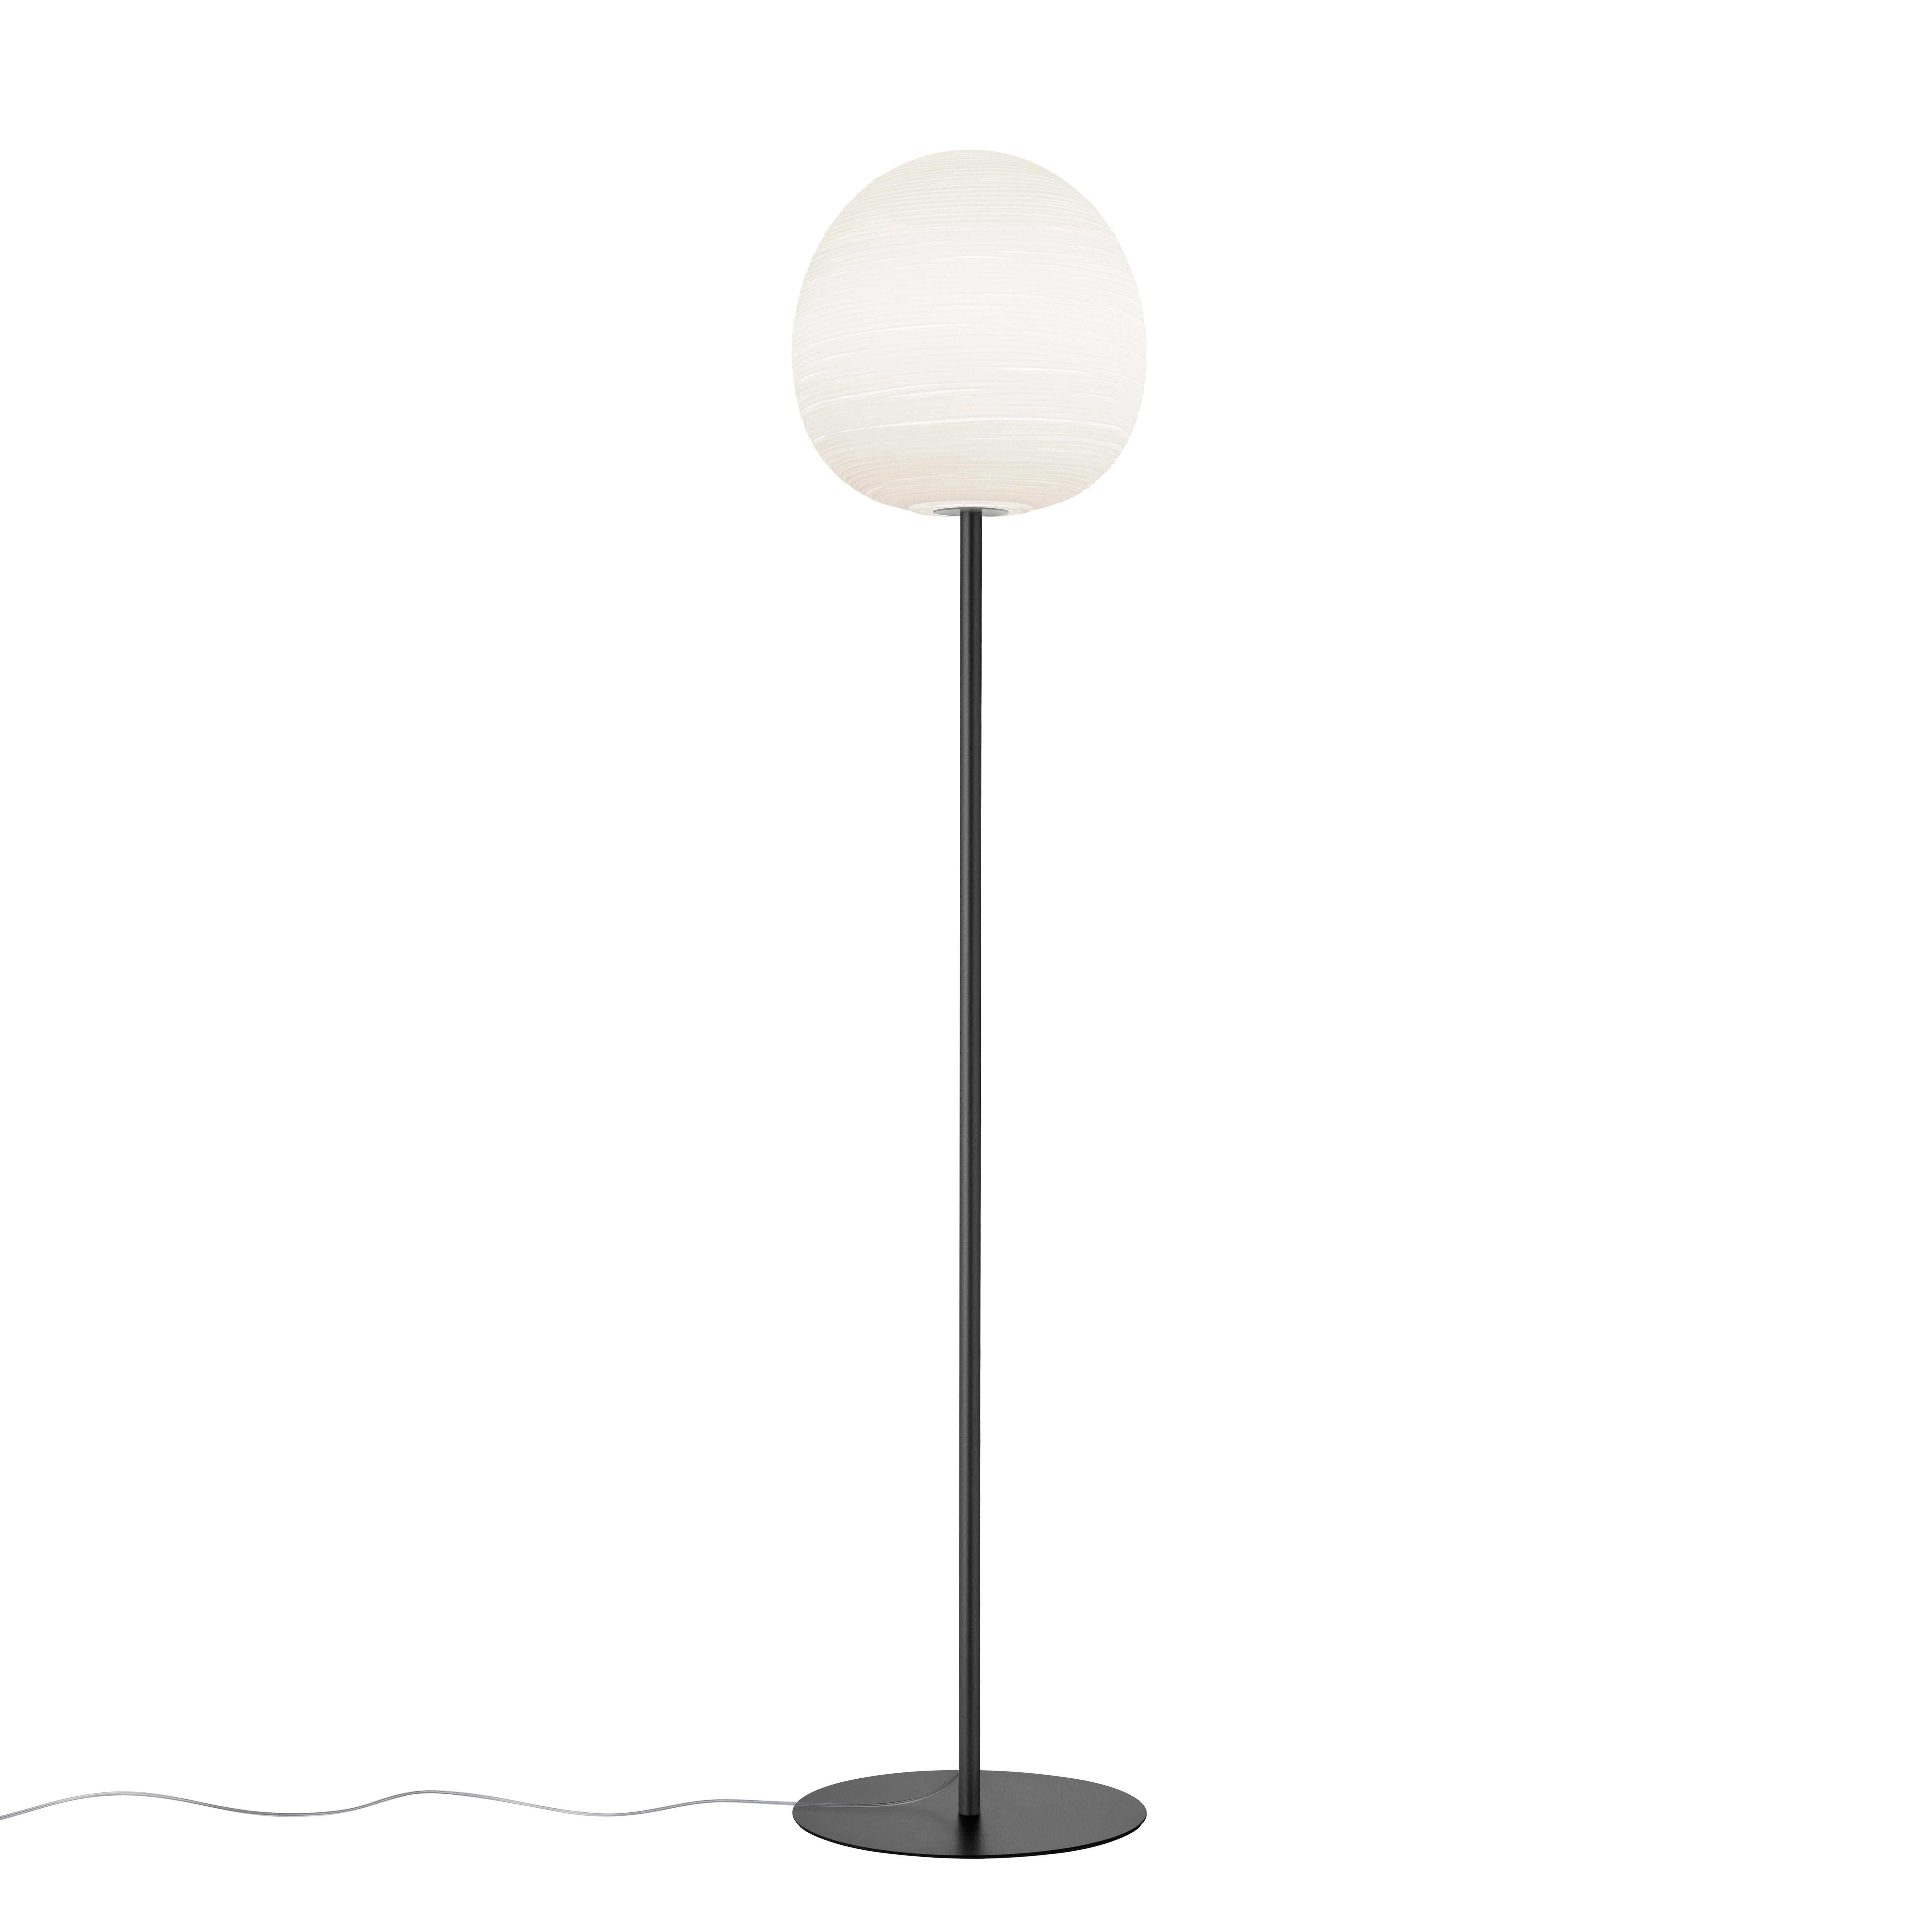 Foscarini Rituals XL Floor Lamp by Ludovica & Roberto Palomba In New Condition For Sale In Brooklyn, NY